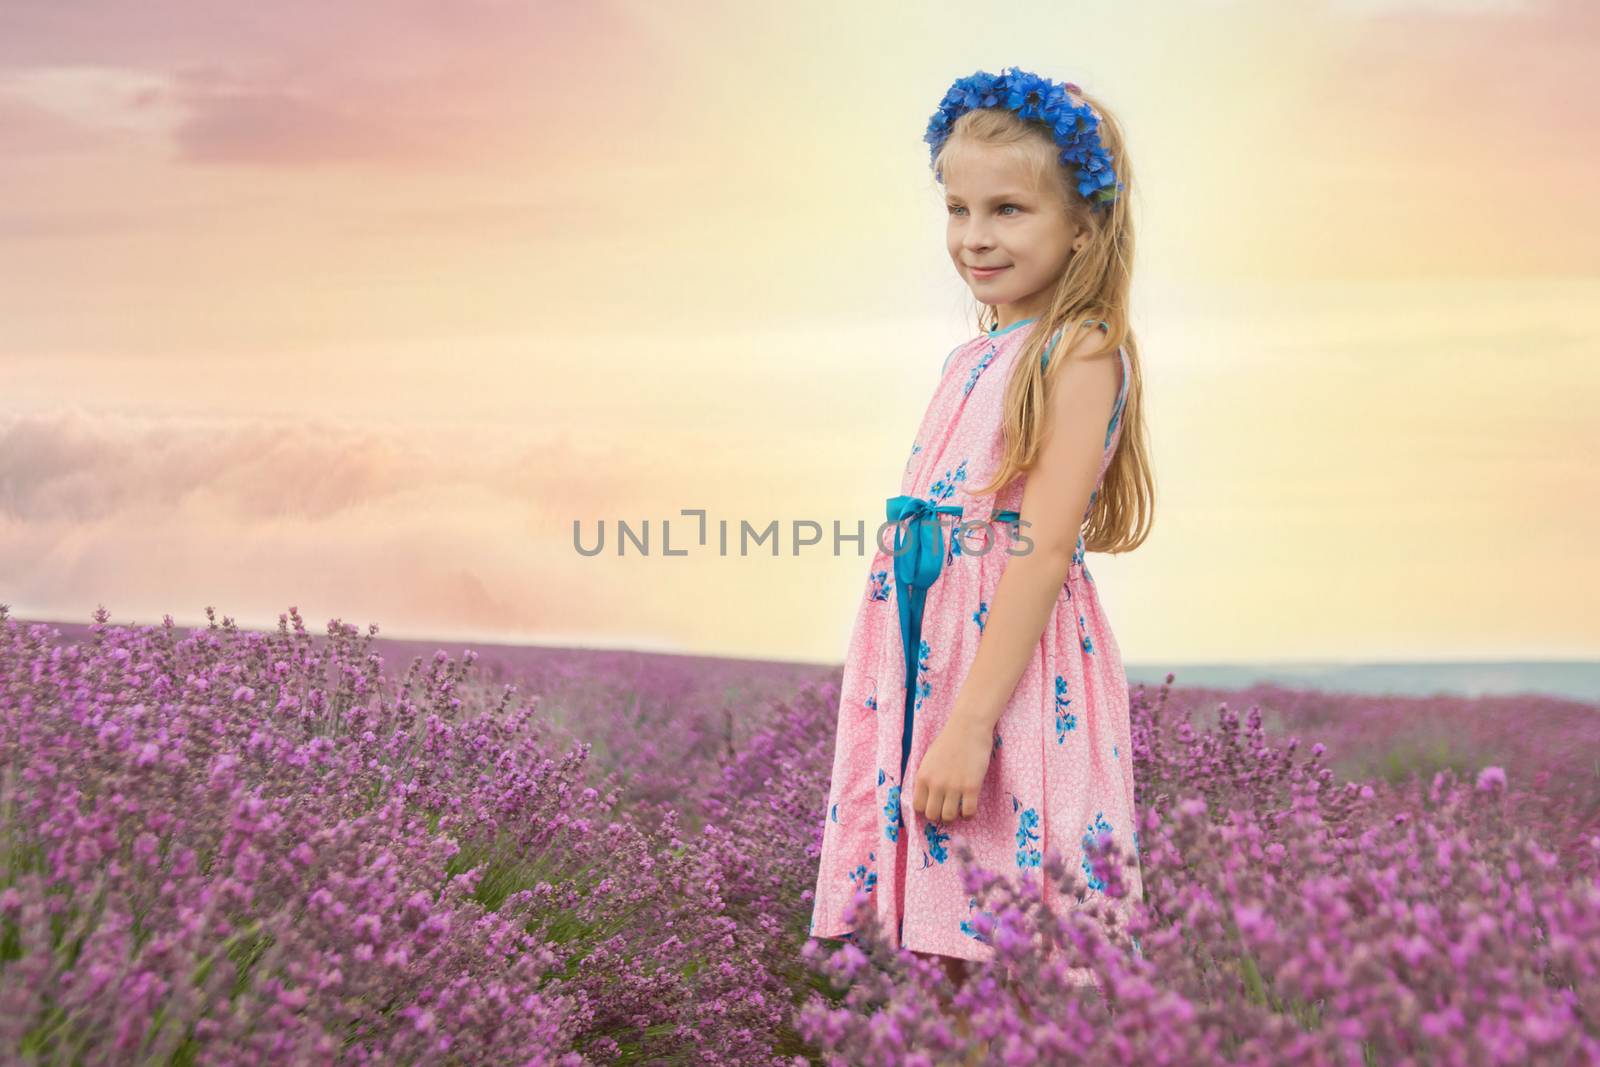 Girl among lavender fields at sunset by Angel_a